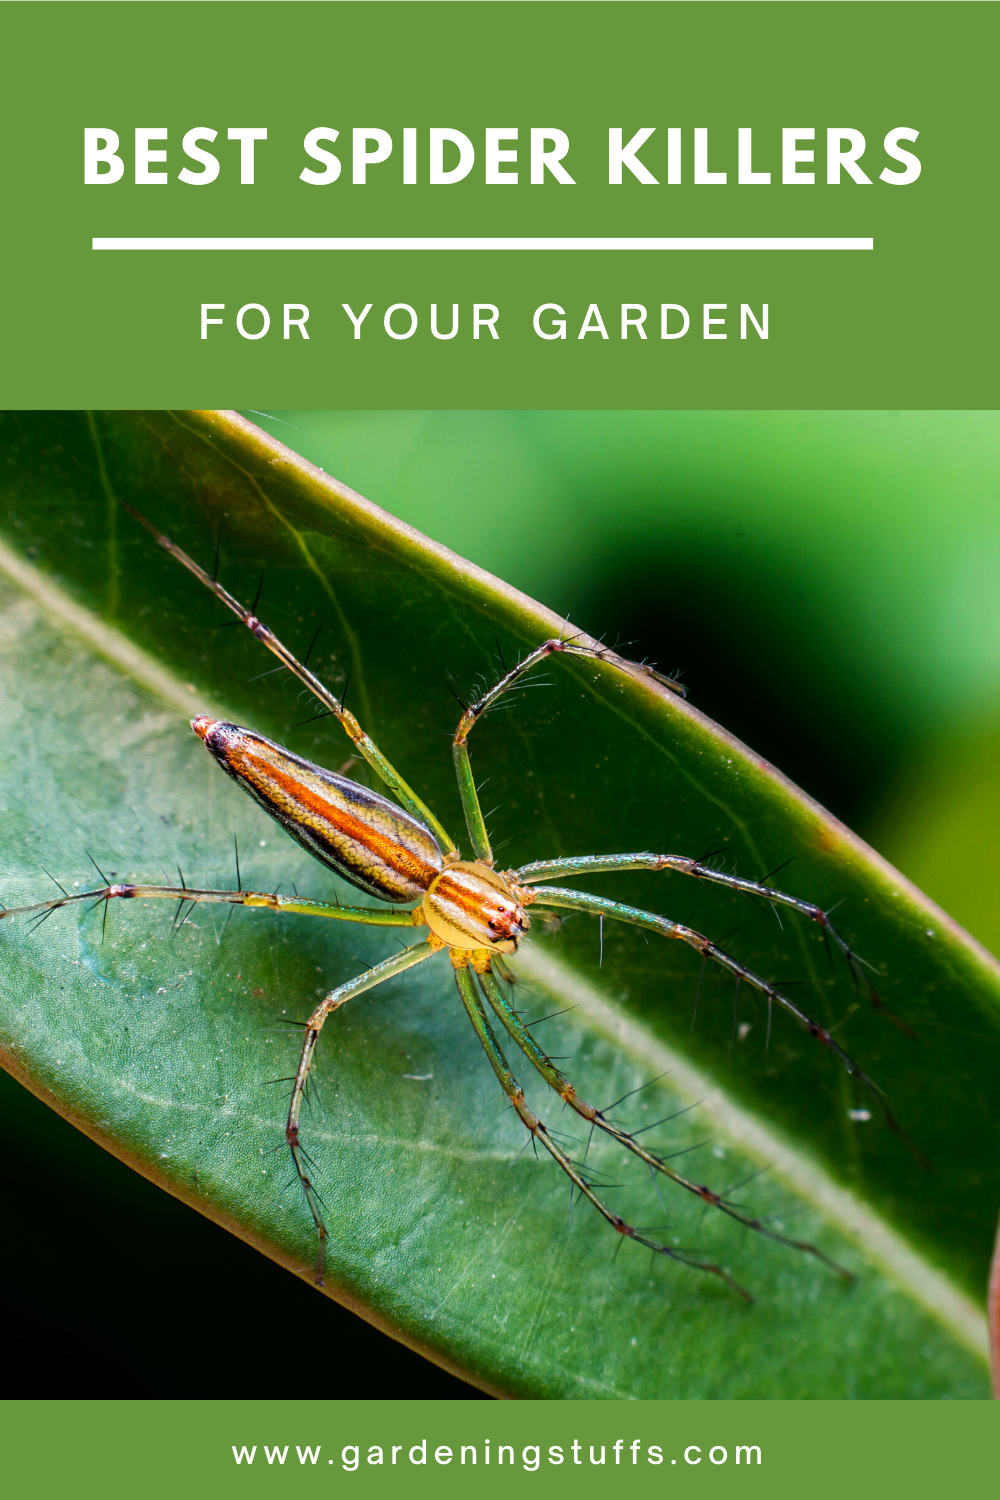 As we all know, spiders can be a major pest and many more of us shudder at the sight of a spider, making them one of the most feared insects on the planet. Thankfully, there are more options than ever to help you get rid of spiders in your home and garden. Check out this article, I’ll be going over a range of ways you can kill these pesky insects and keep your family safe from venomous spiders.